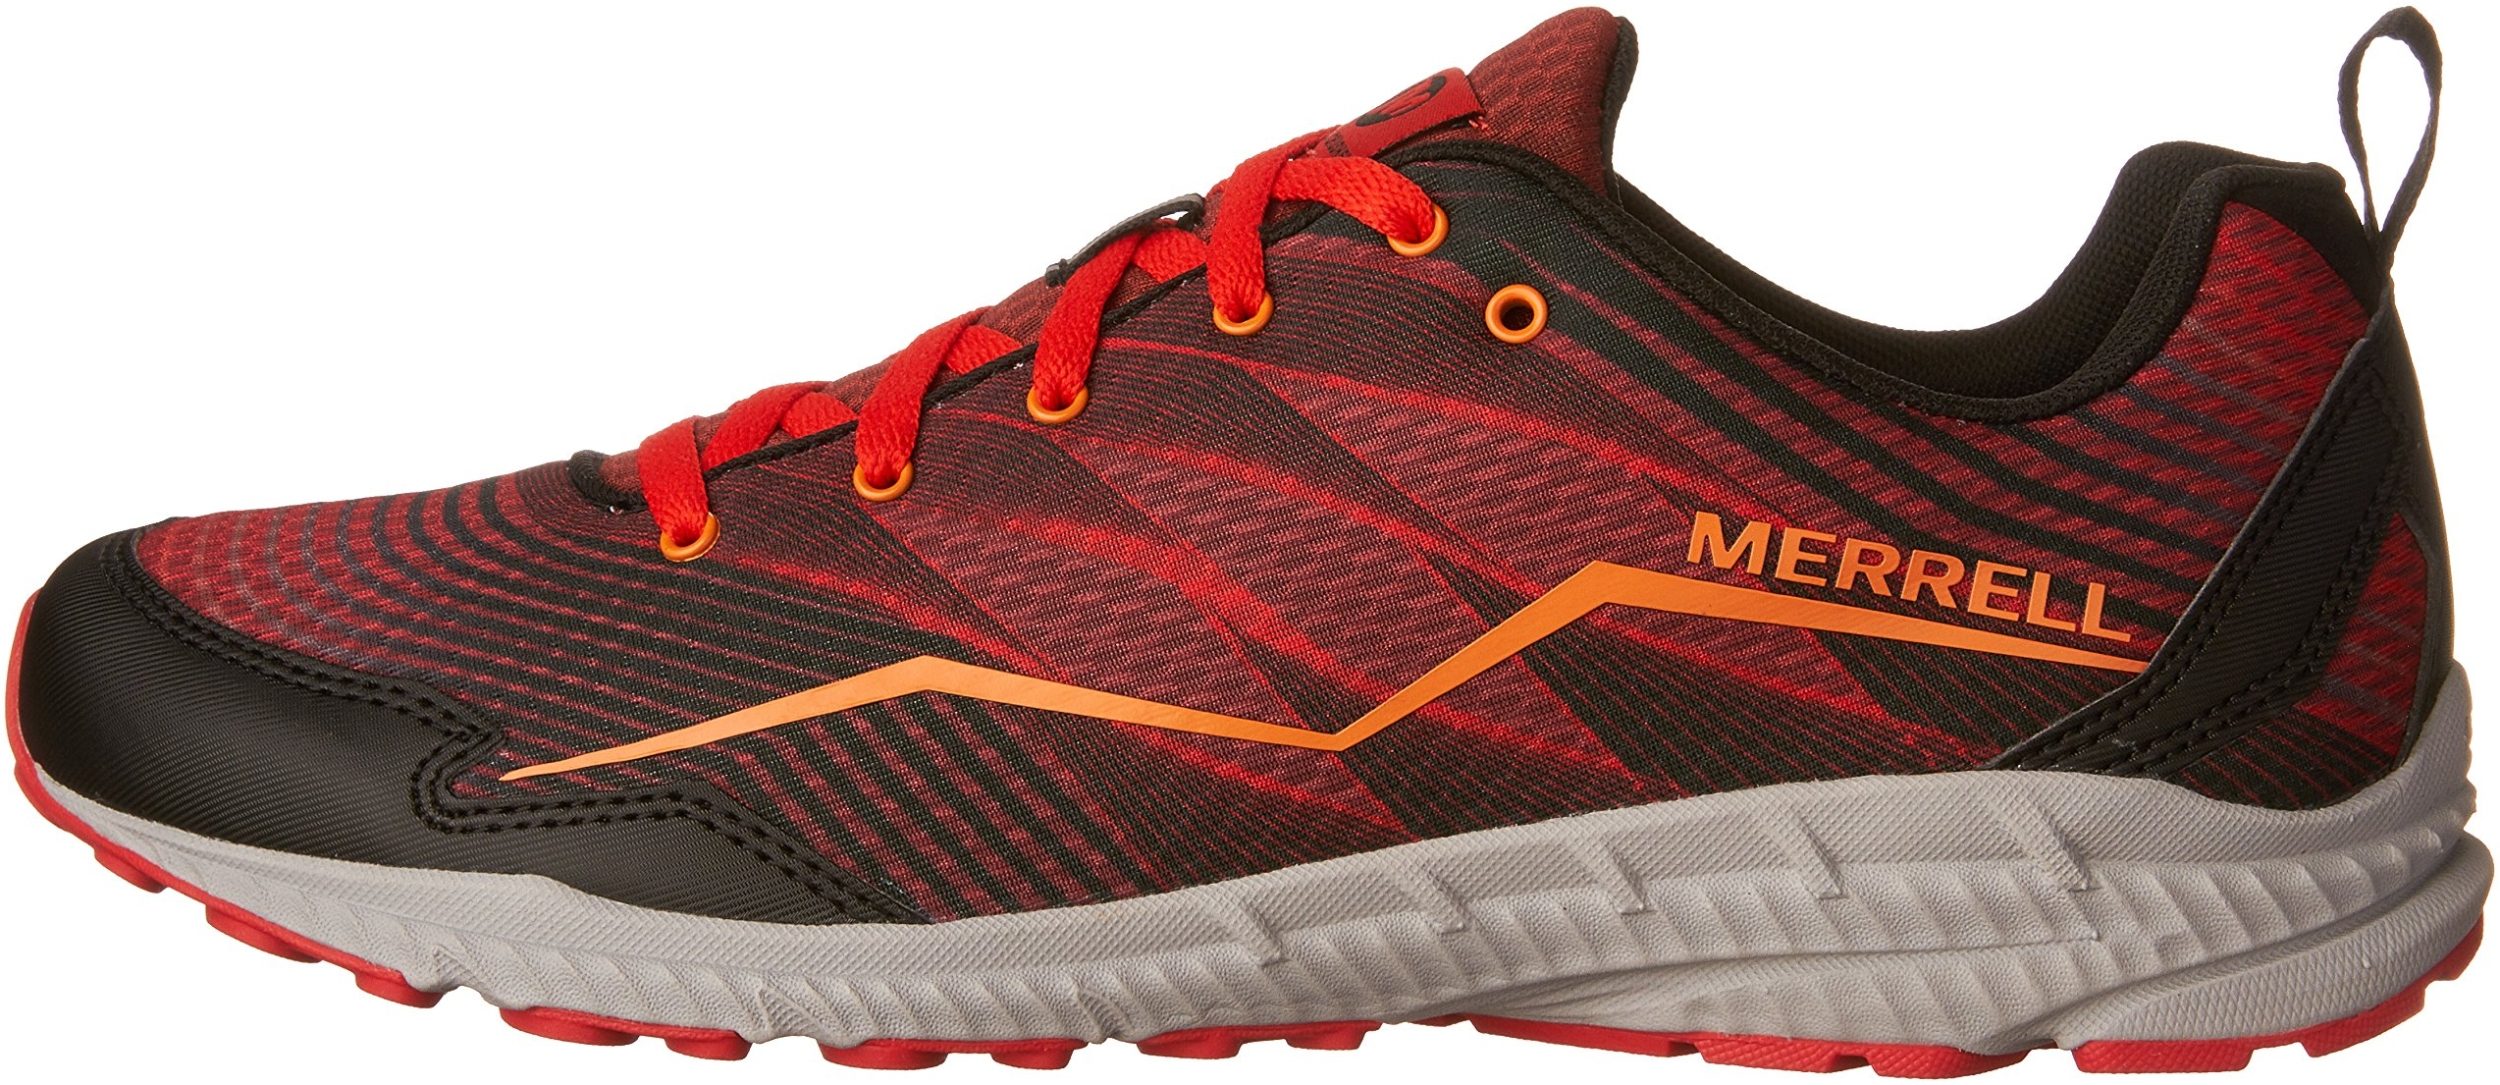 red merrell shoes